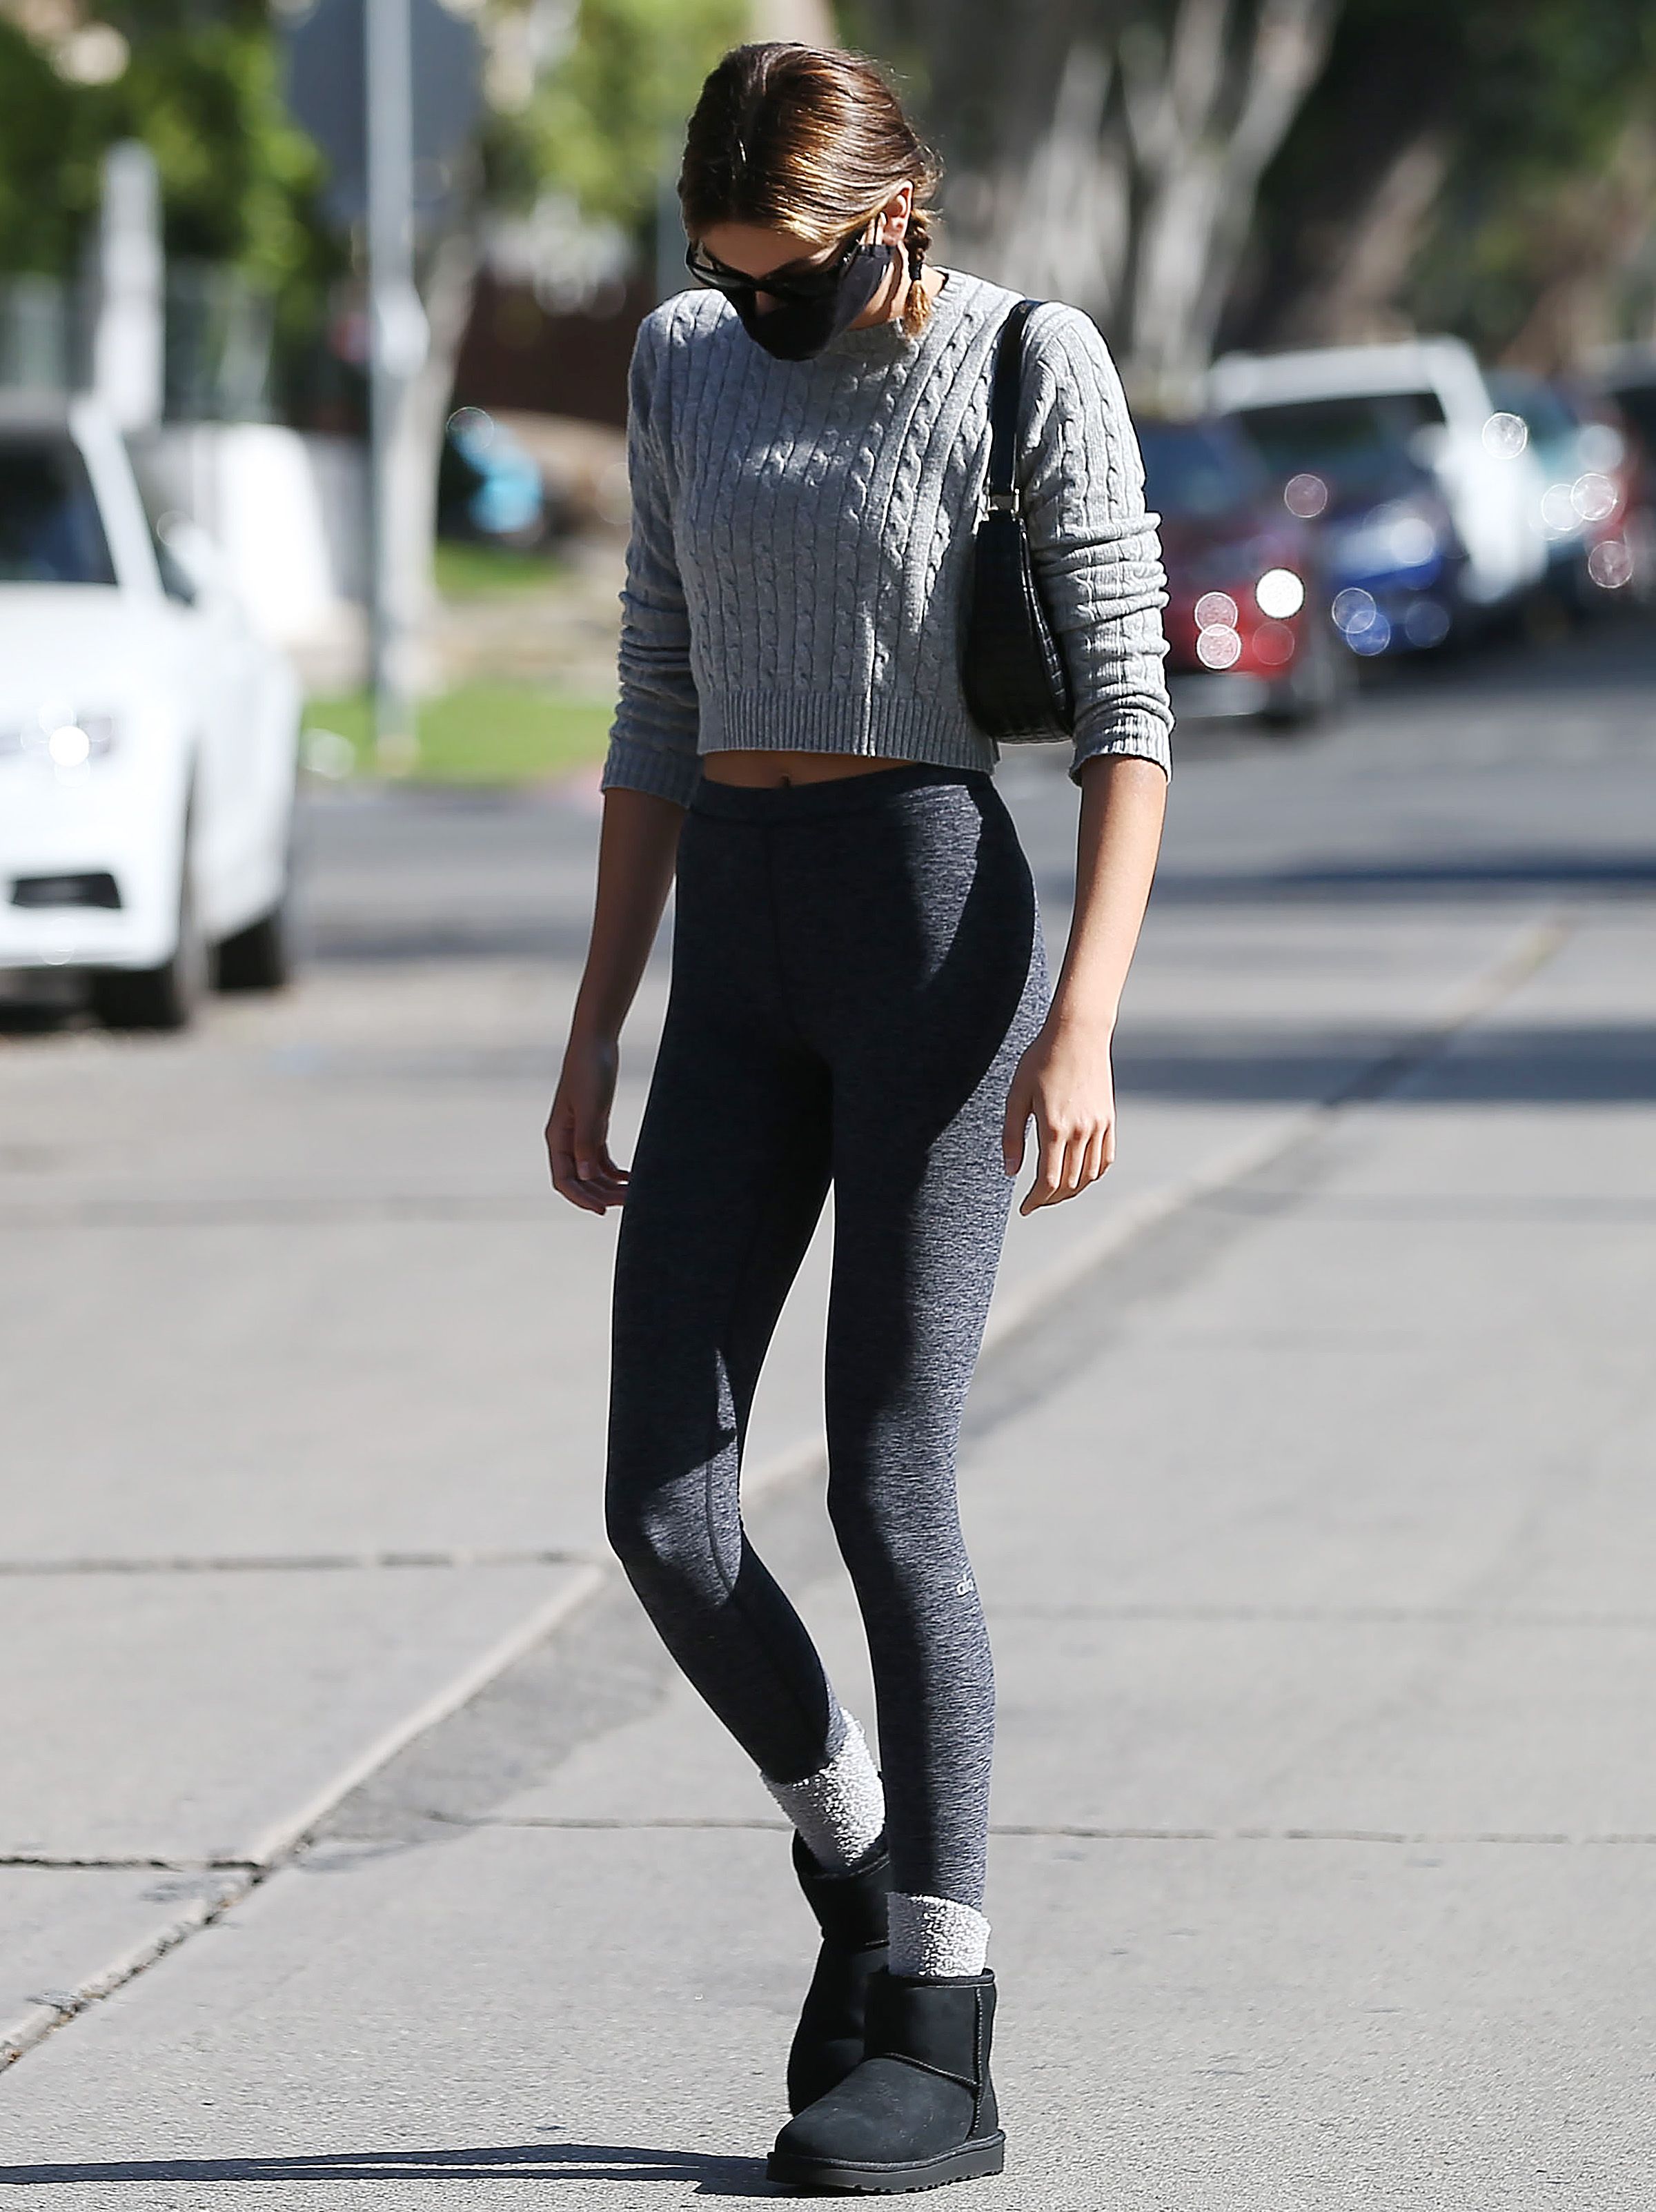 The Leggings Celebrities Can't Get Enough Of